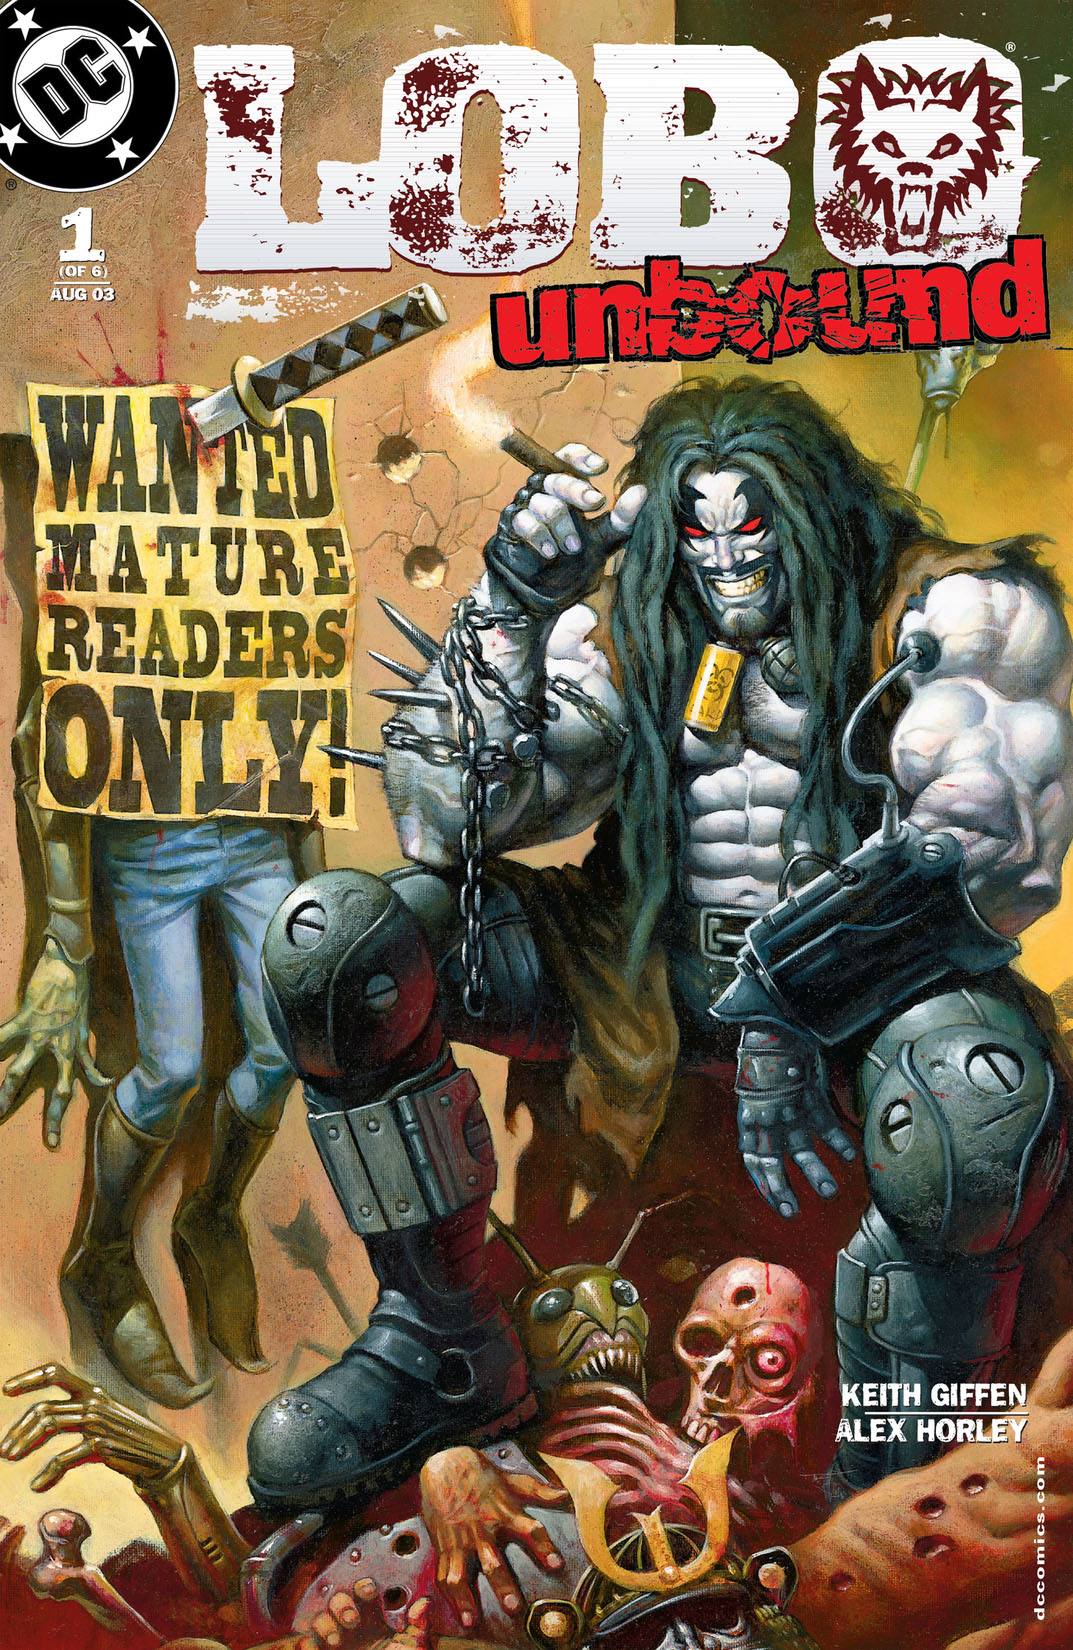 Lobo Unbound #1 preview images